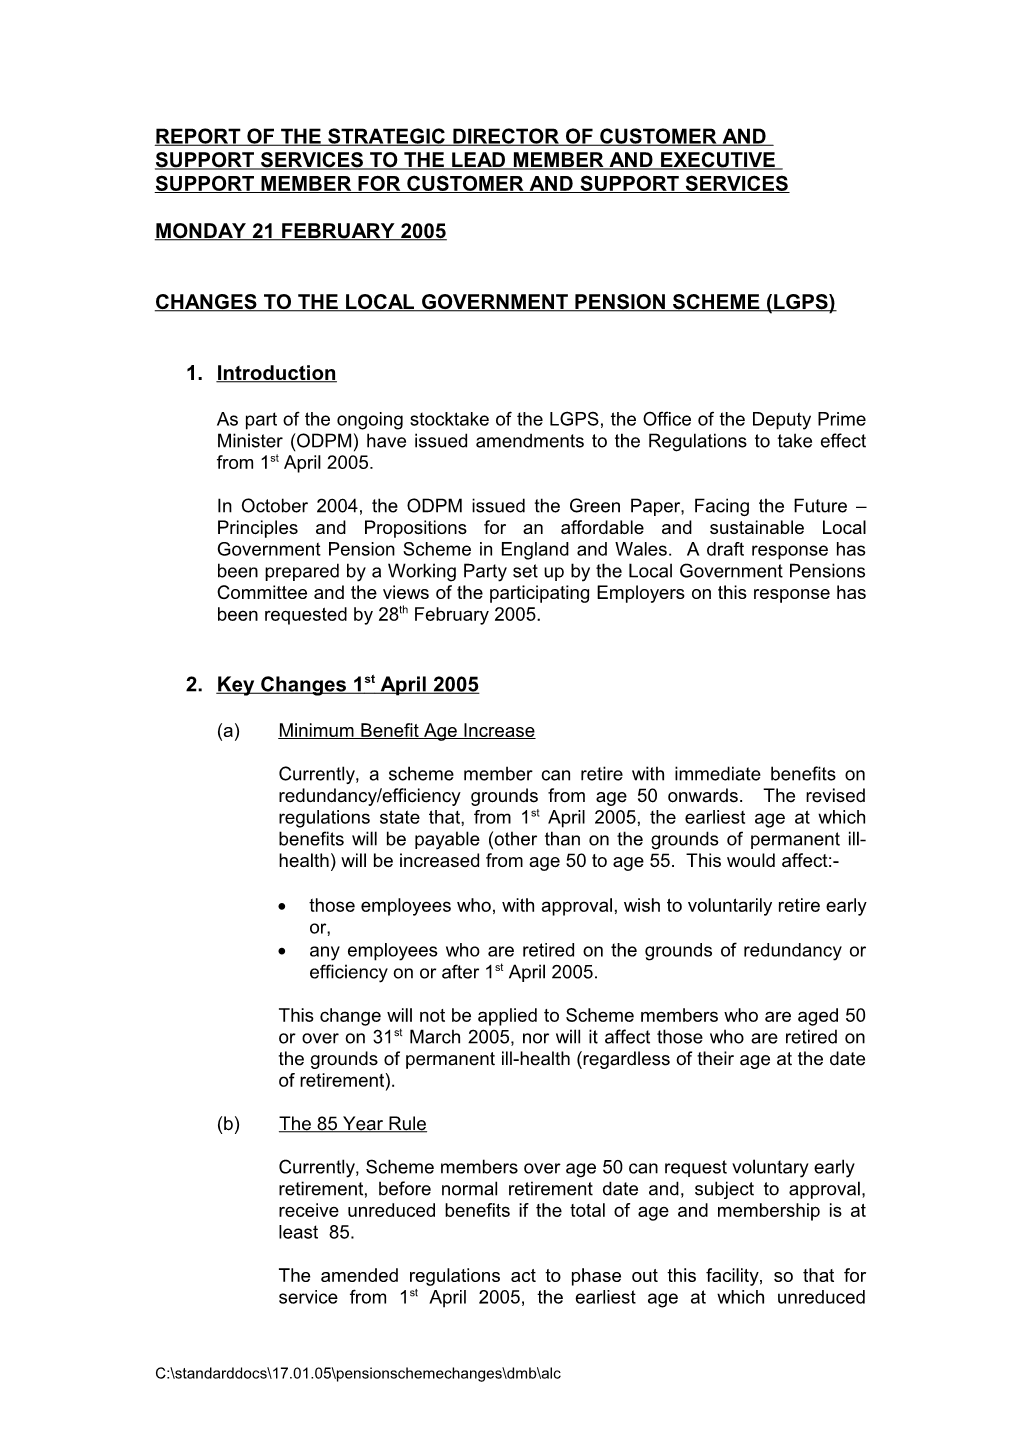 Changes to the Local Government Pension Scheme (Lgps)